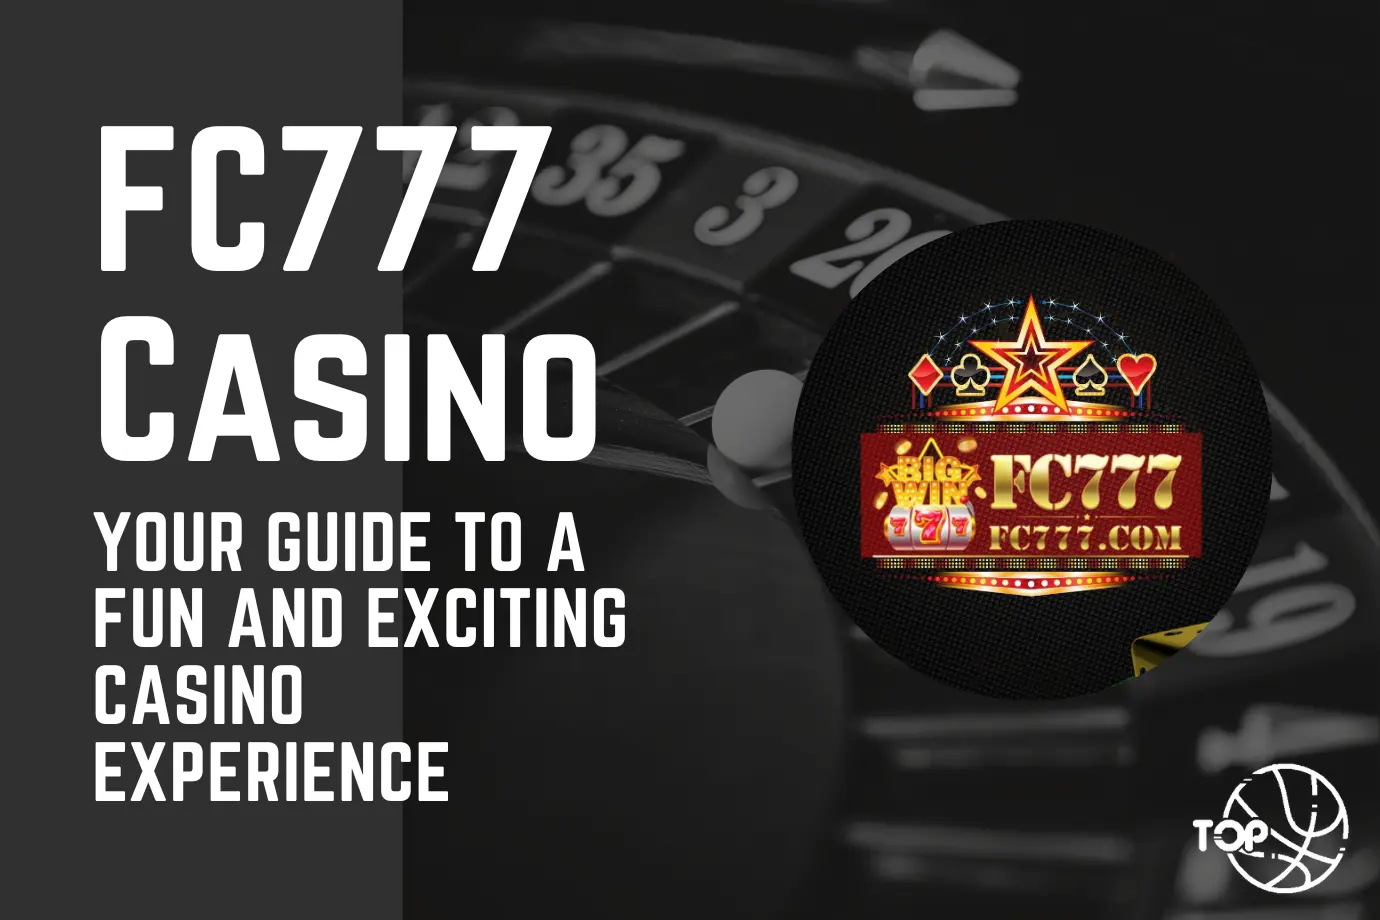 FC777 Casino: Your Guide to a Fun and Exciting Casino Experience